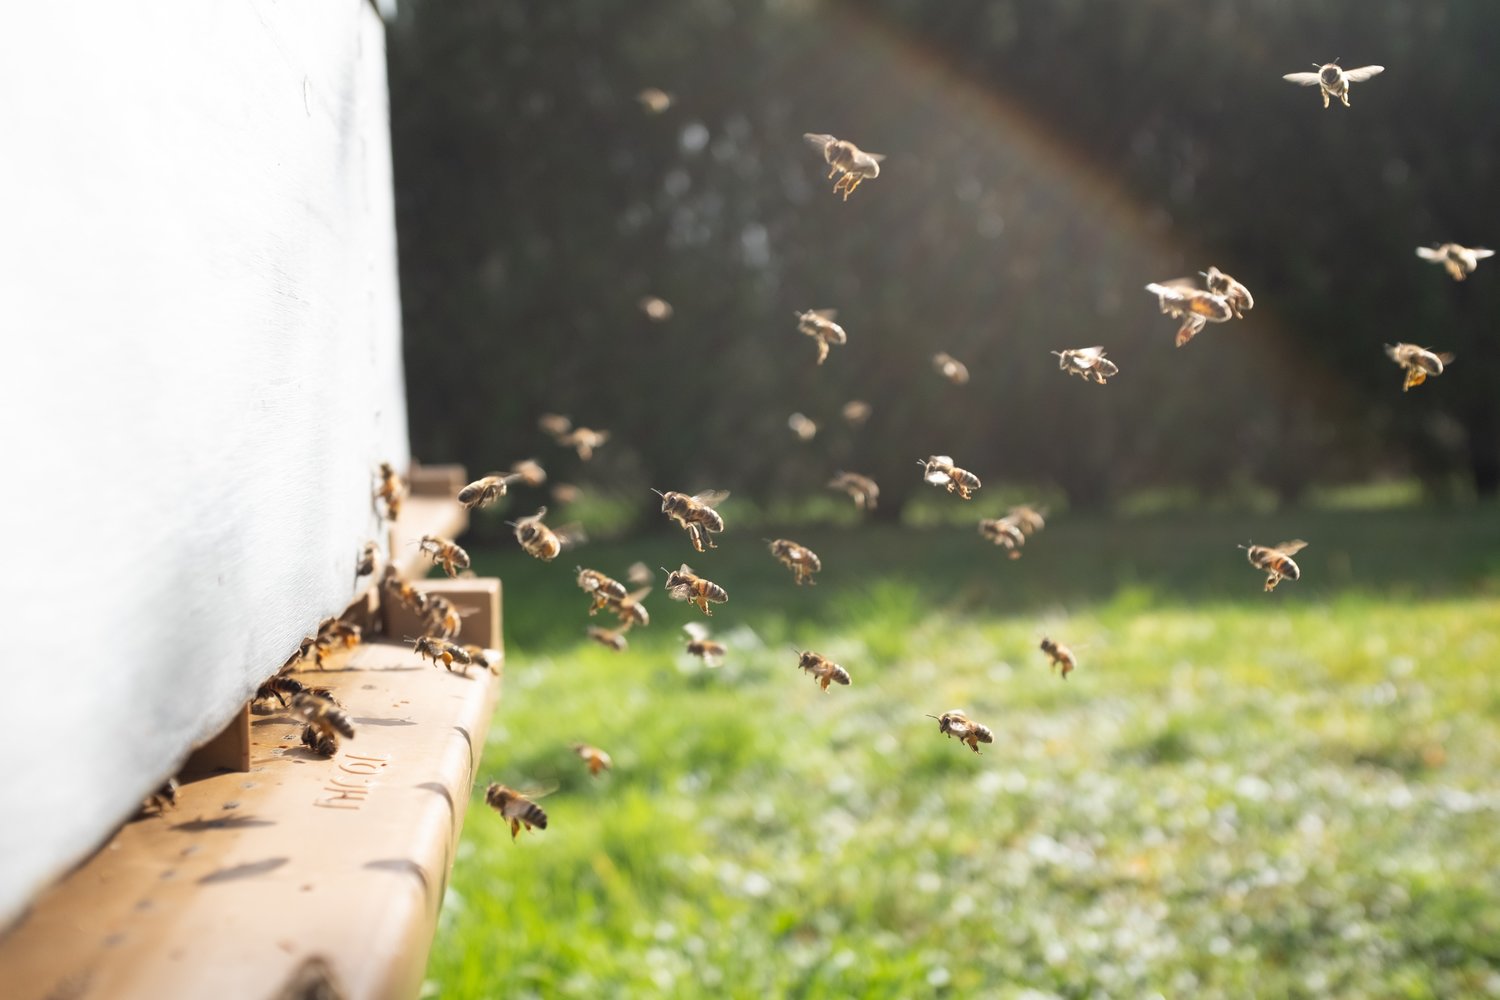 While you’re stuck at home, take this free opportunity to learn something new you might want to implement into your daily life. Maybe you’re the next beekeeper in the neighborhood.